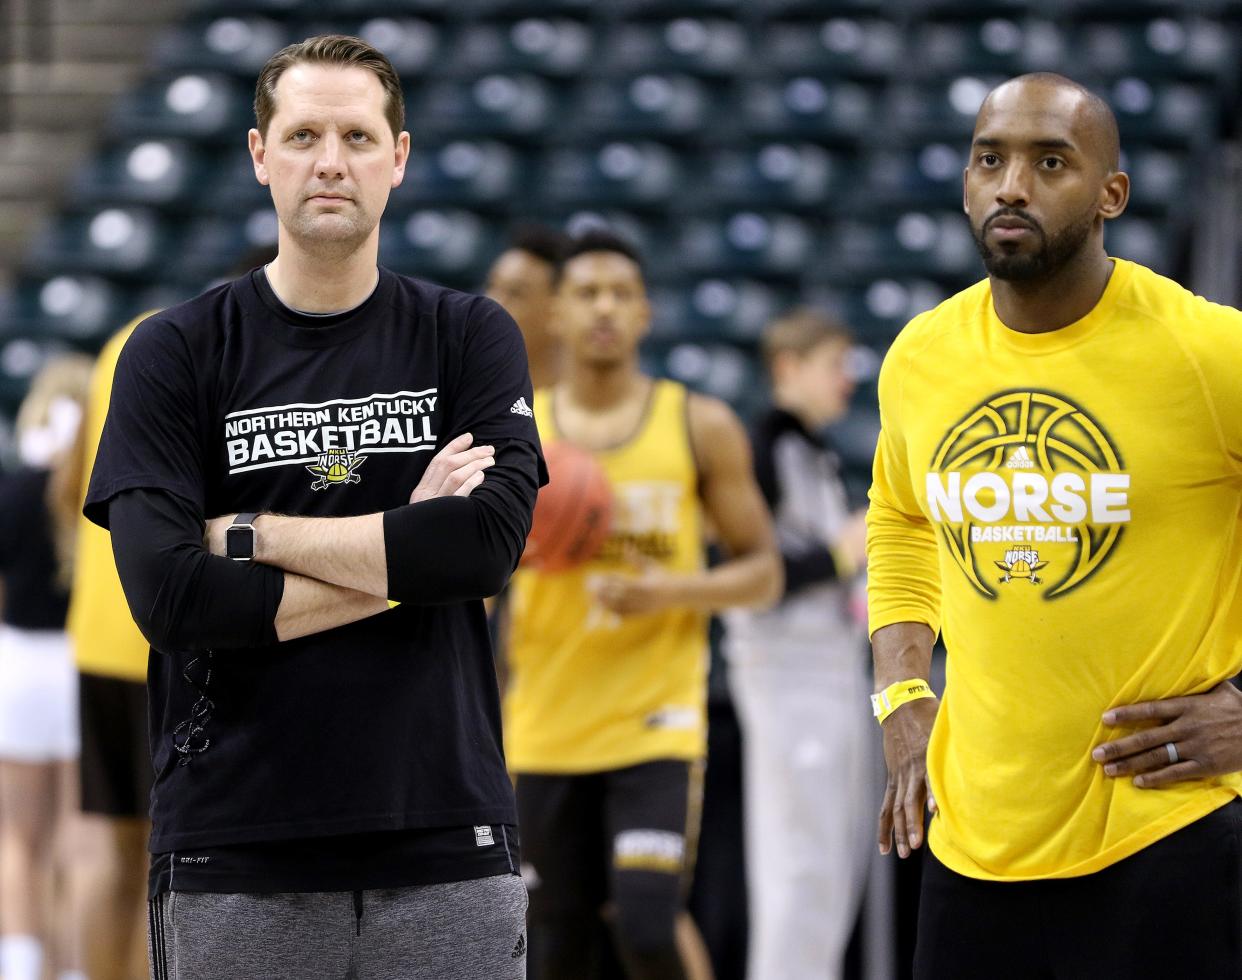 Northern Kentucky University head coach John Brannen, left, and assistant coach Tim Morris watch their team run drills at Bankers Life Fieldhouse in Indianapolis Thursday, March 16, 2017. NKU earned the No. 15 seed in the South Region and will play No. 2-seed Kentucky in the opening round of the NCAA Menâ€™s Basketball Championship in Indianapolis on Friday.